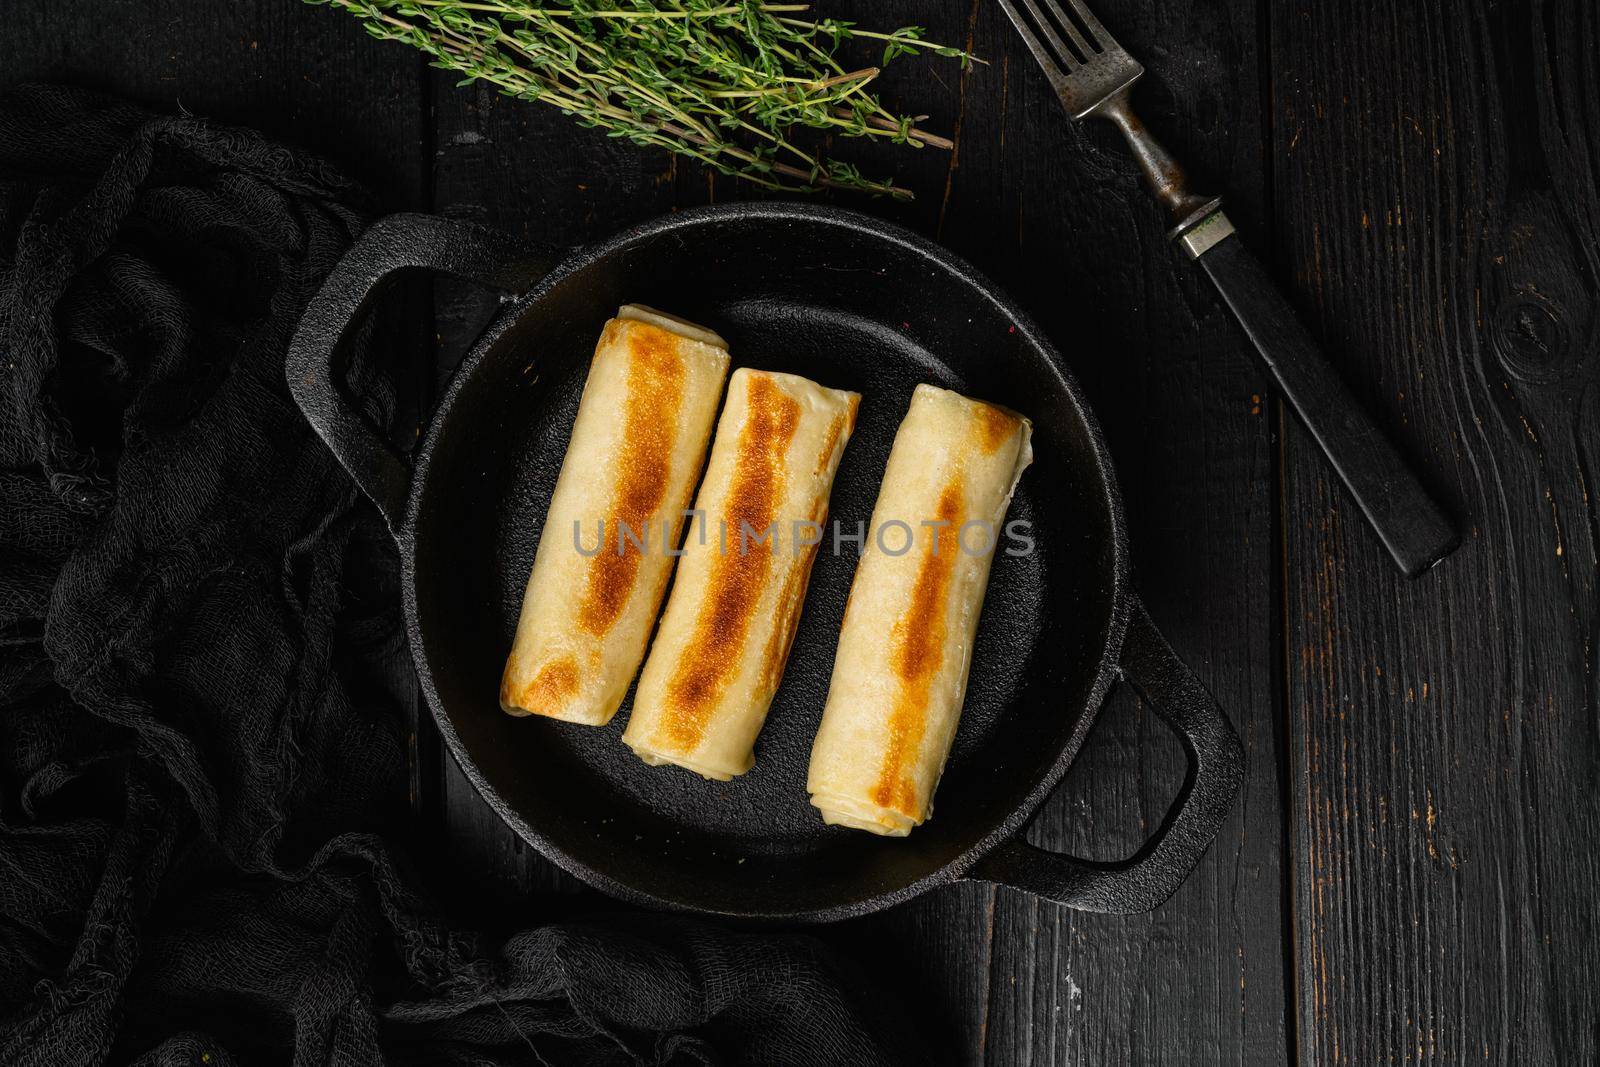 Fried georgian crepes stuffed with suluguni on black wooden table background, top view flat lay, with copy space for text by Ilianesolenyi